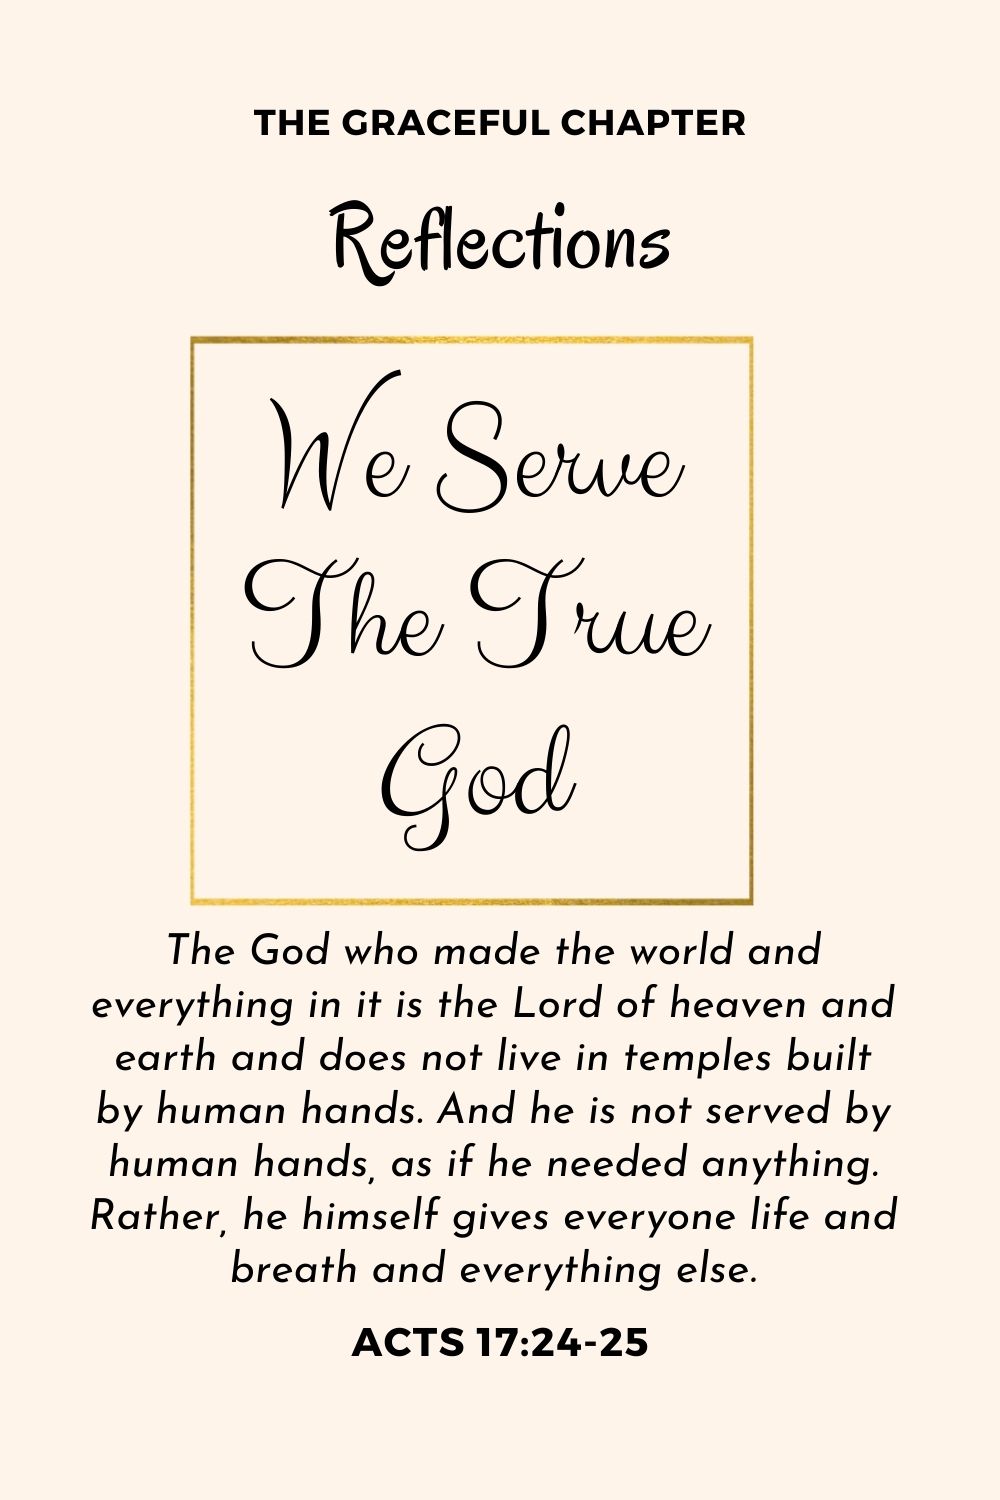 Reflection - Acts 17:24-25 - We Serve The True God